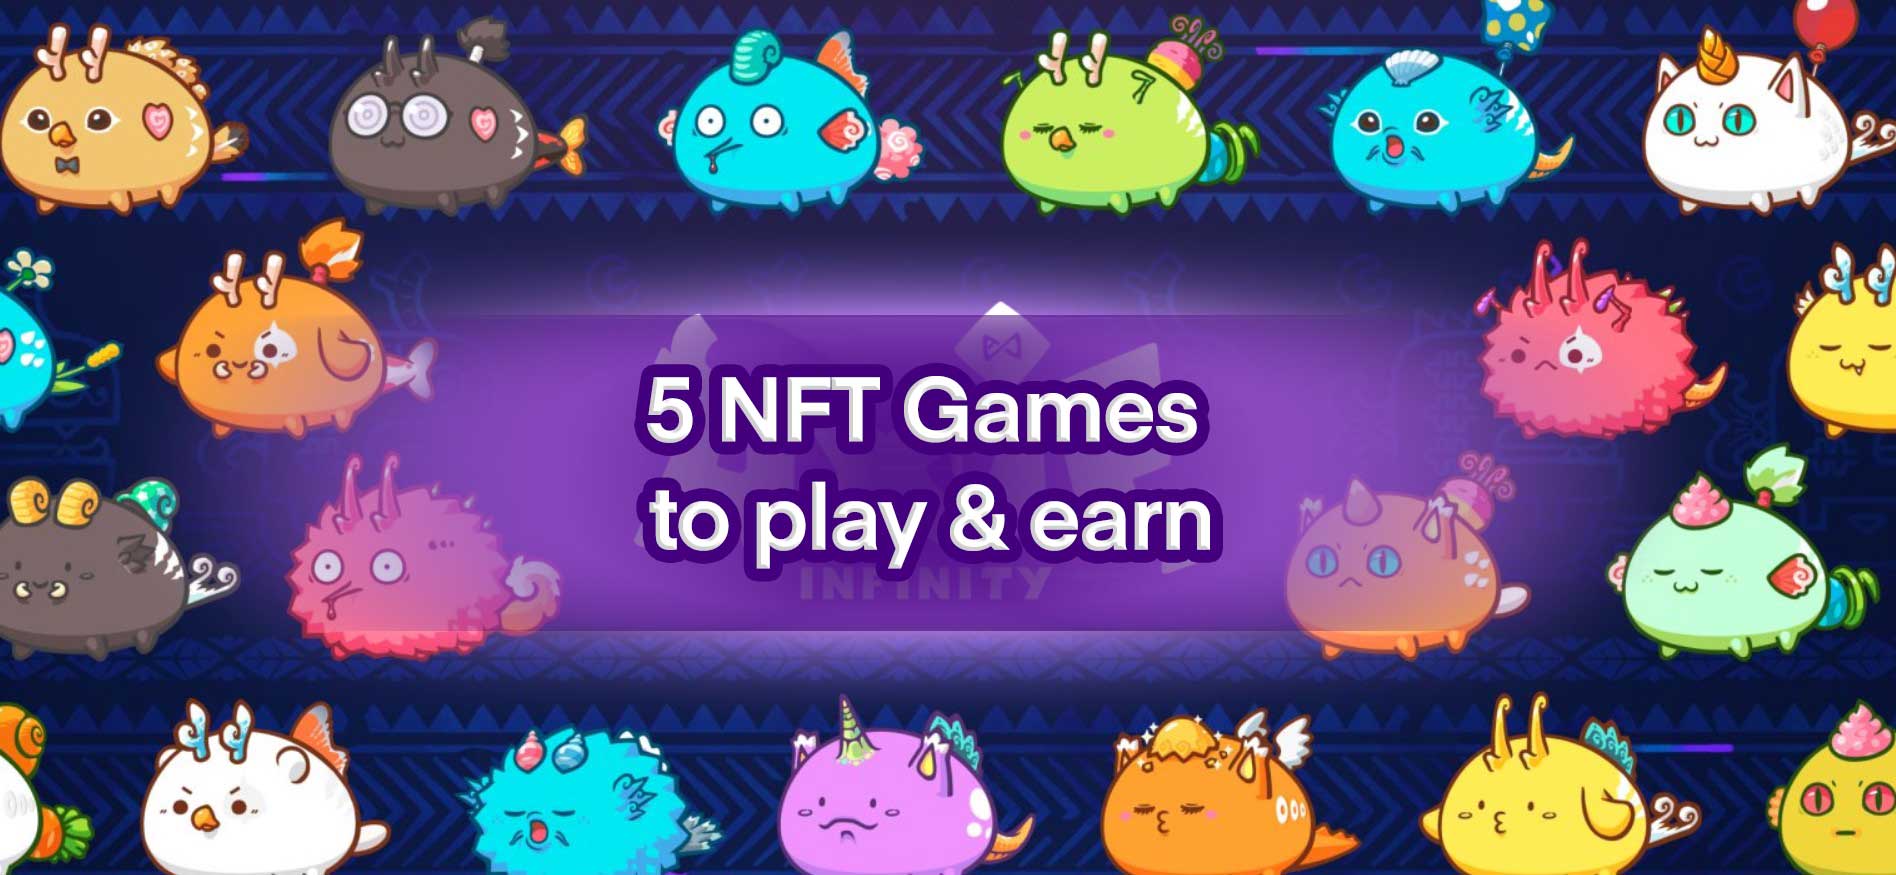 Top Nft Games Play To Earn 2021 Mobile Legends